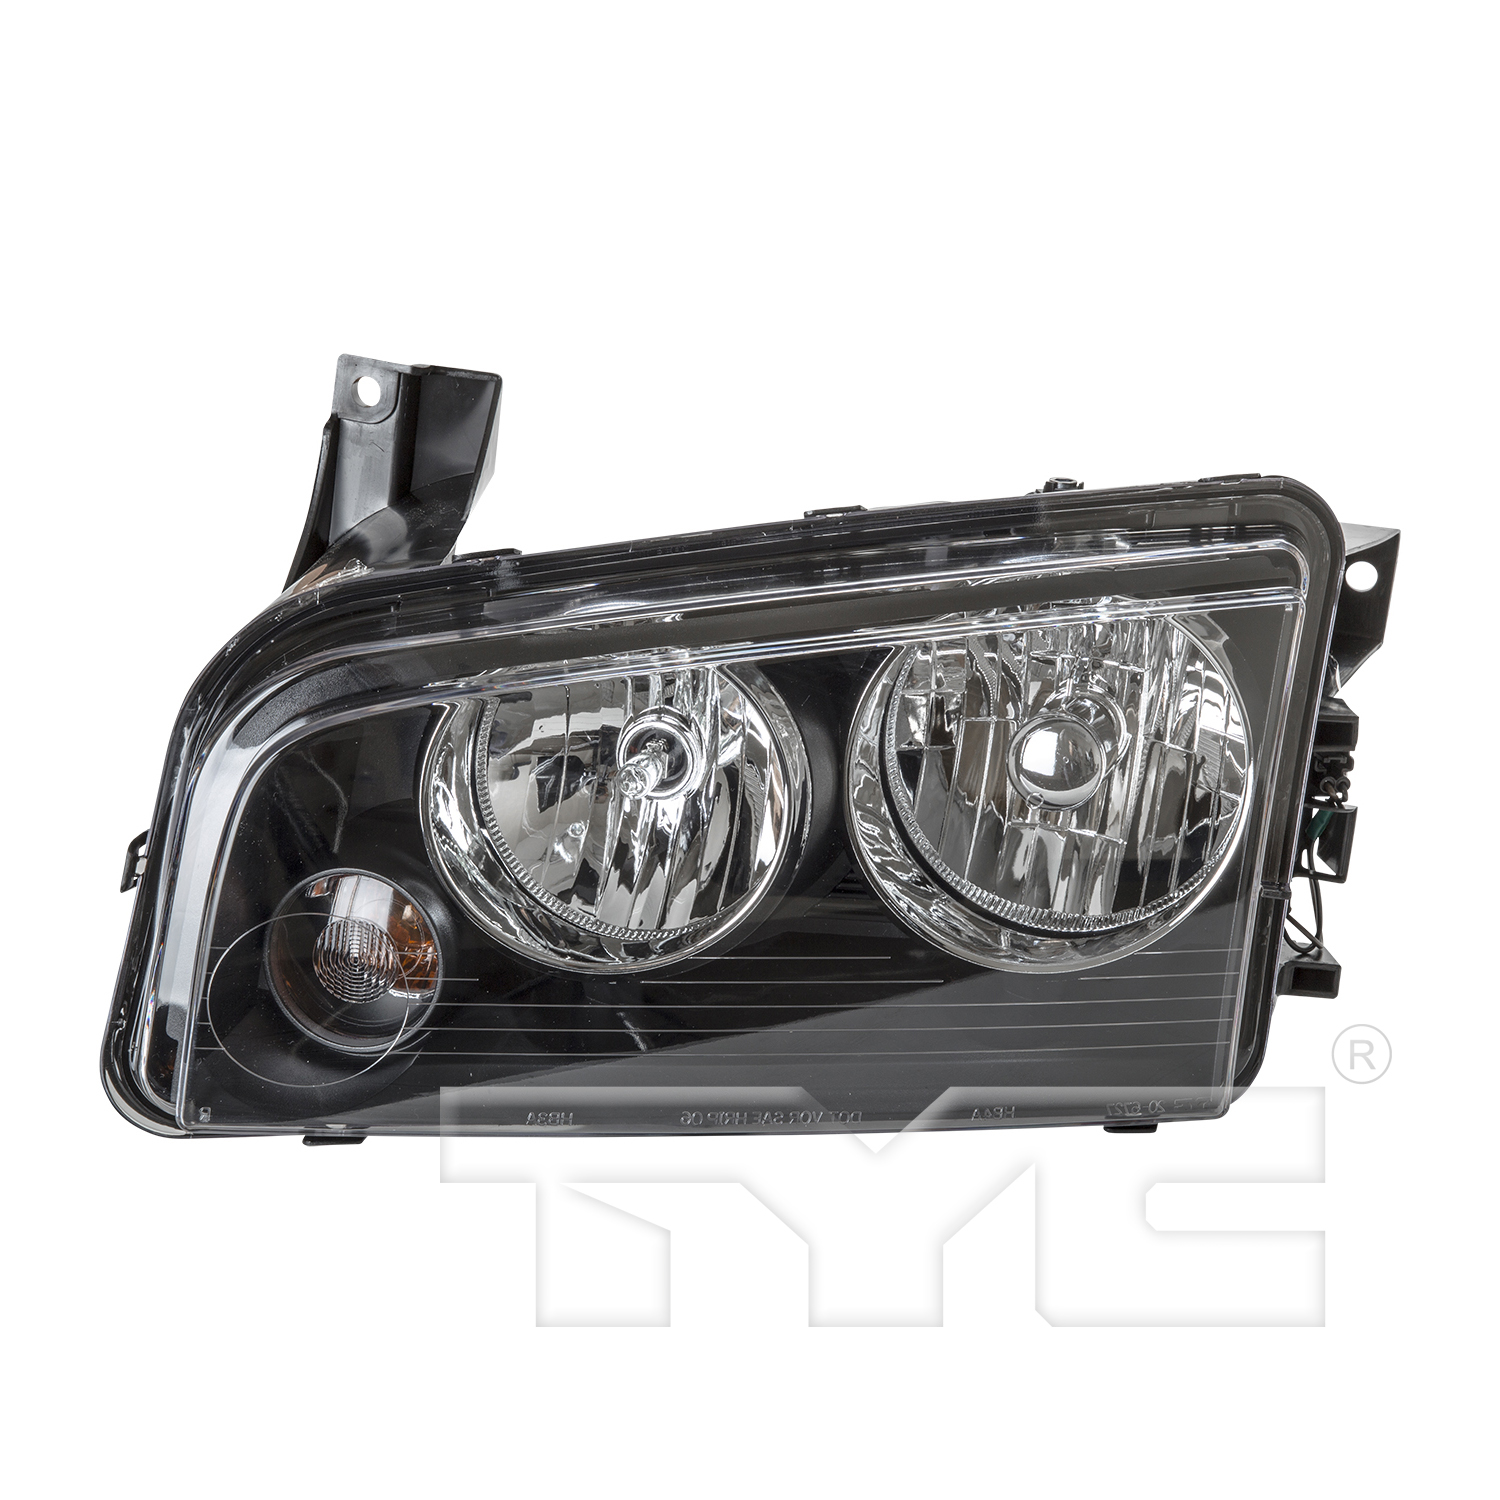 Aftermarket HEADLIGHTS for DODGE - CHARGER, CHARGER,06-07,LT Headlamp assy composite